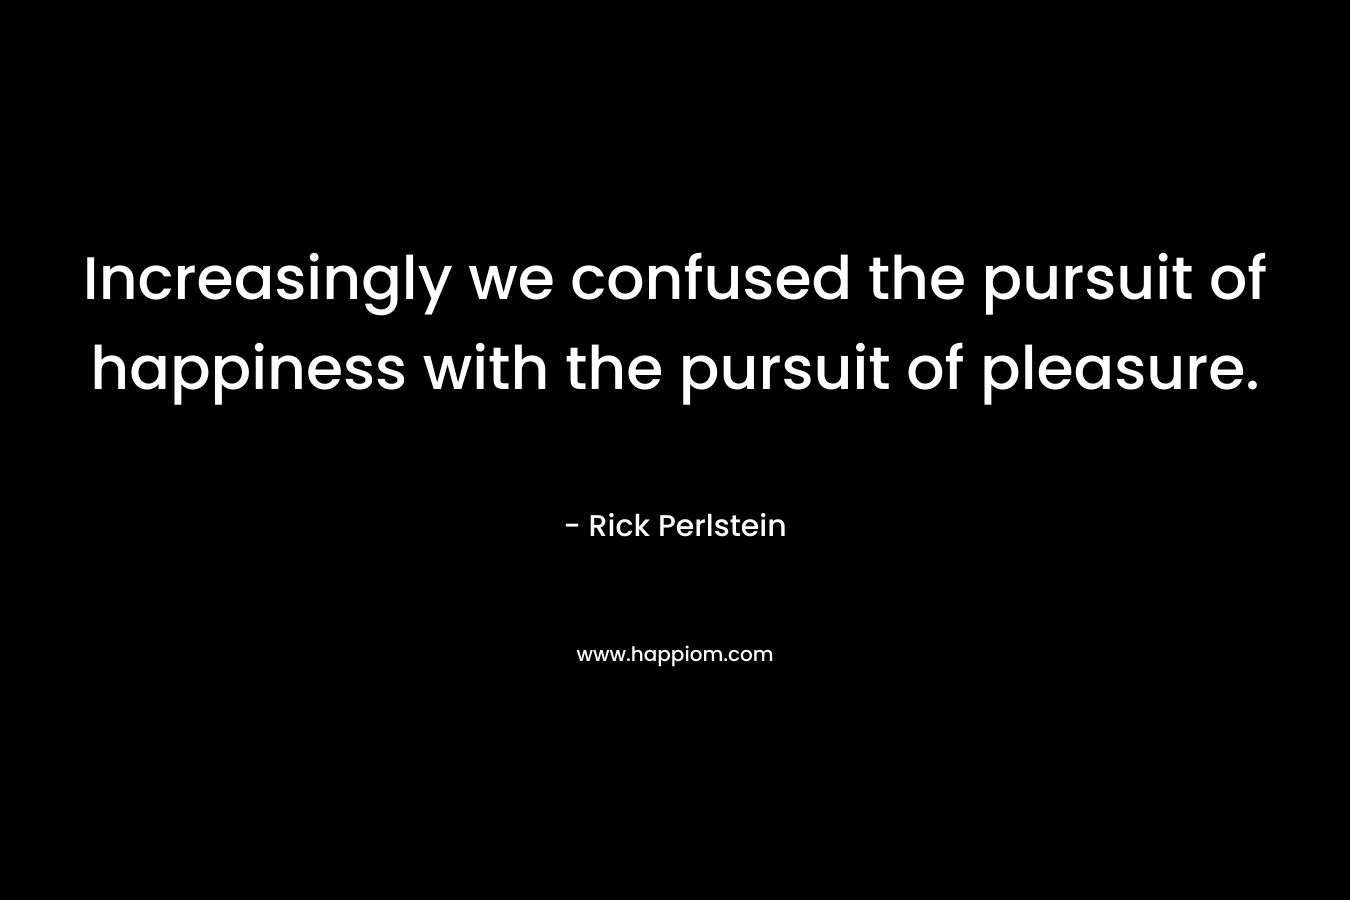 Increasingly we confused the pursuit of happiness with the pursuit of pleasure.